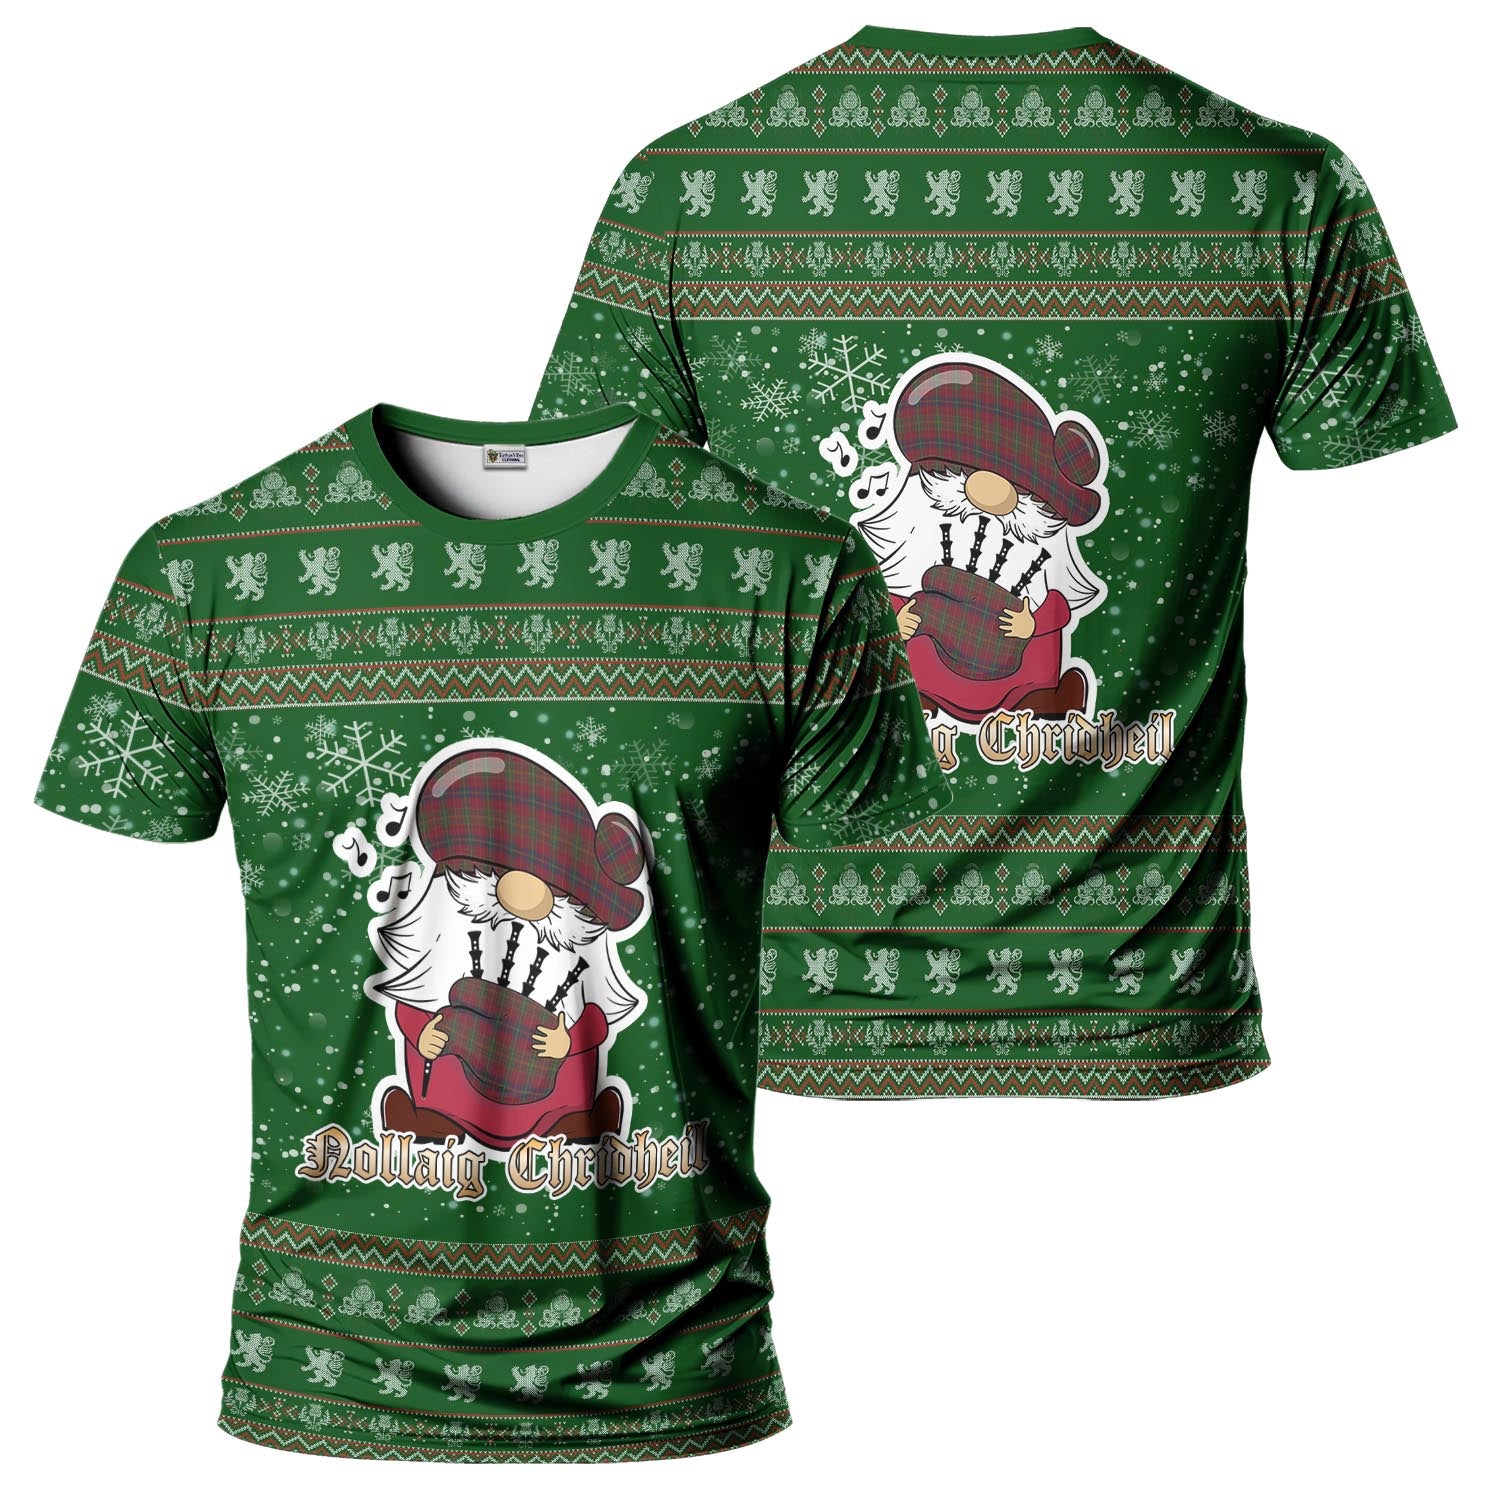 Rice of Wales Clan Christmas Family T-Shirt with Funny Gnome Playing Bagpipes Men's Shirt Green - Tartanvibesclothing